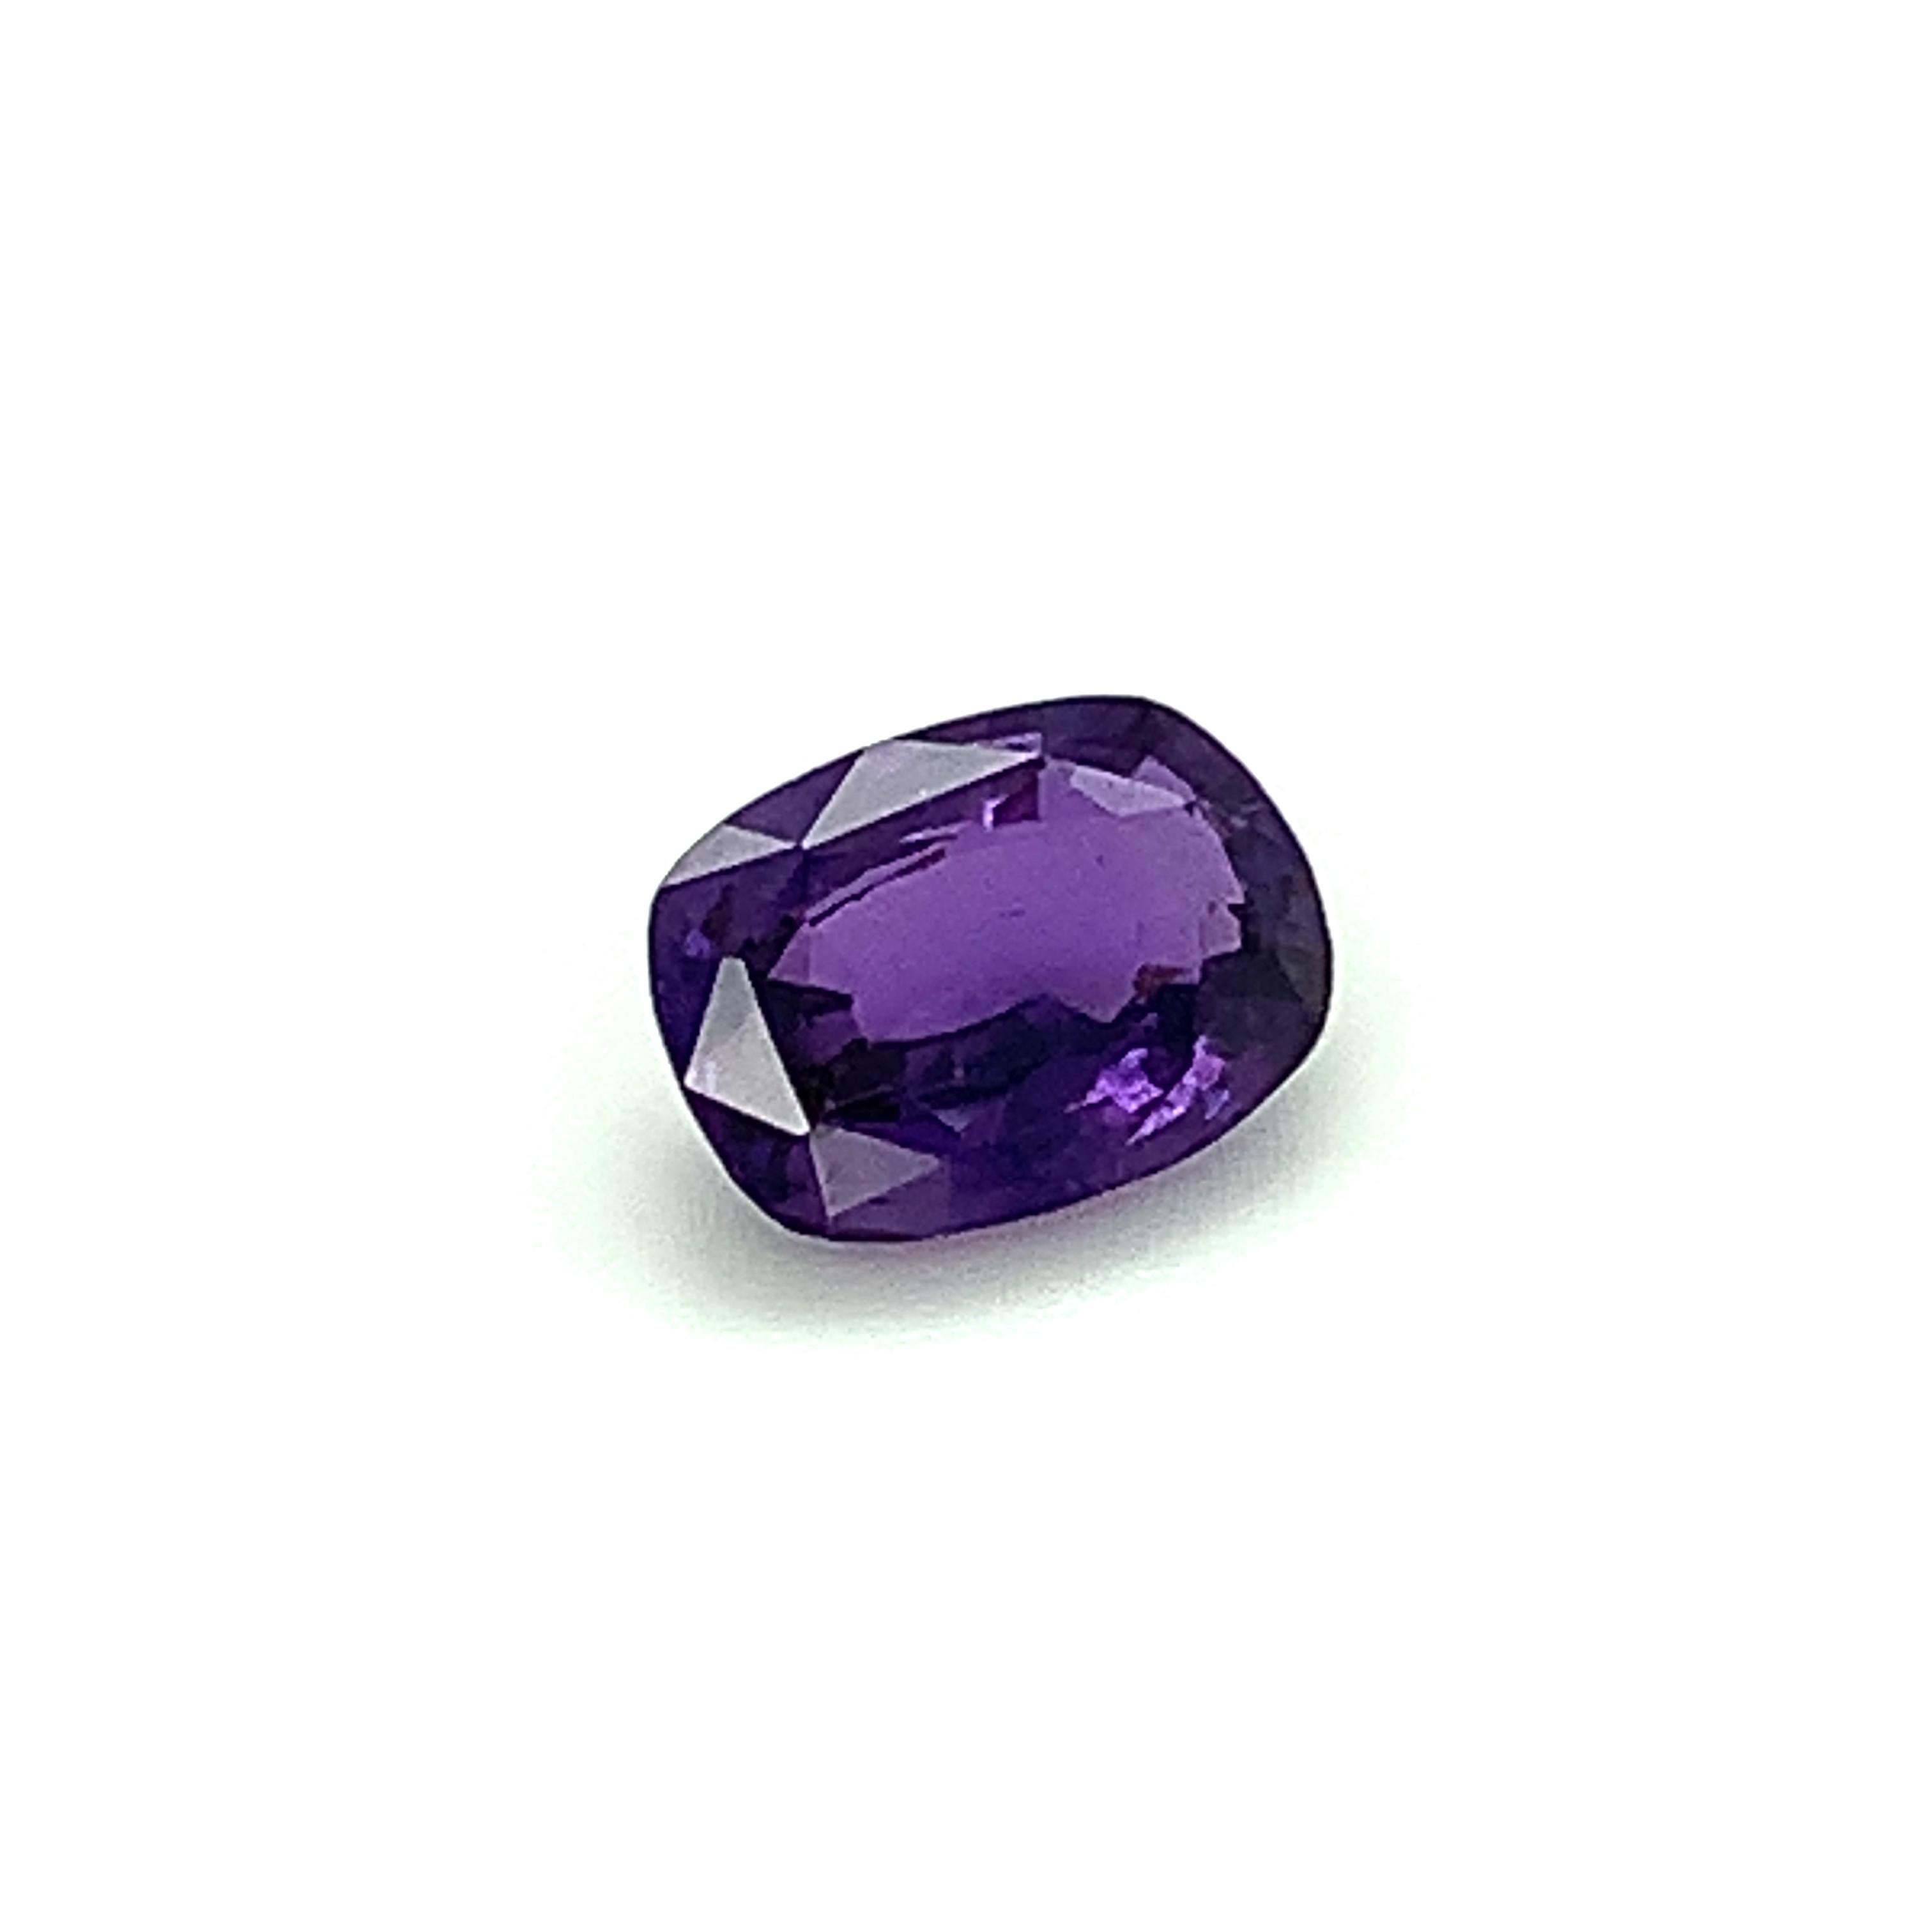 Artisan Unheated 3.50 Carat Color Change Sapphire, Unset Loose Gemstone, GIA Certified For Sale